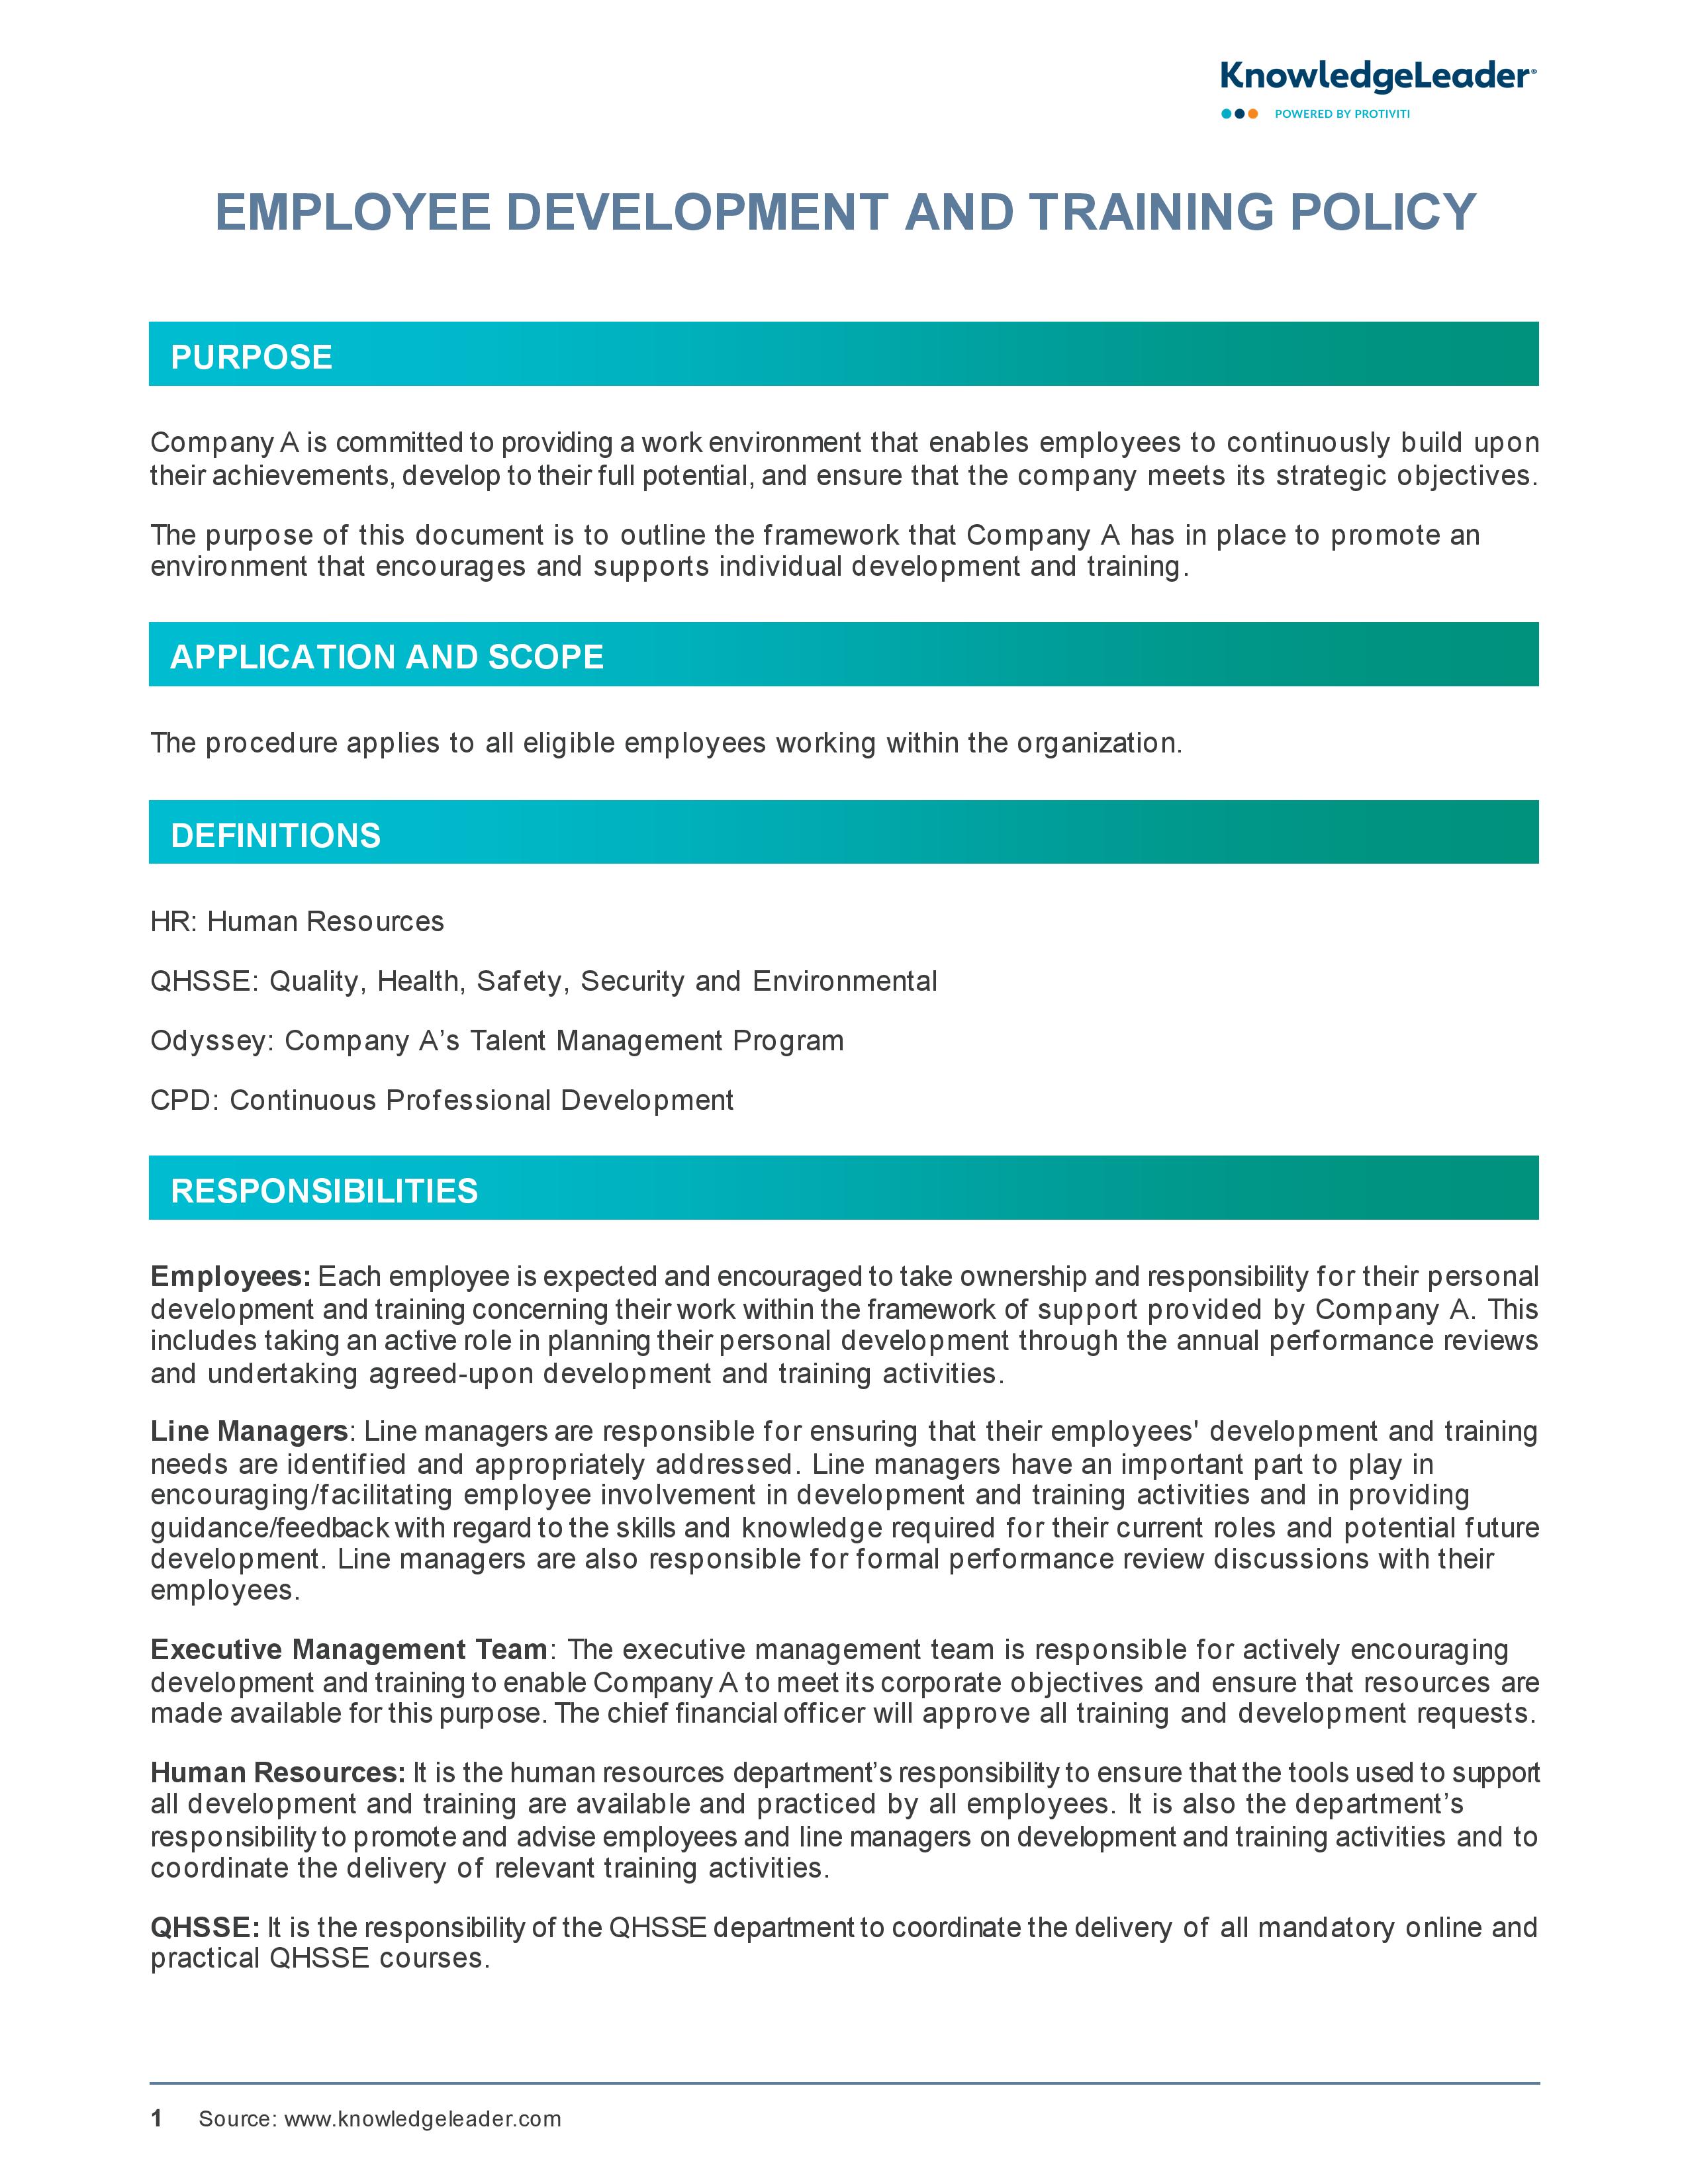 screenshot of the first page of Employee Development and Training Policy